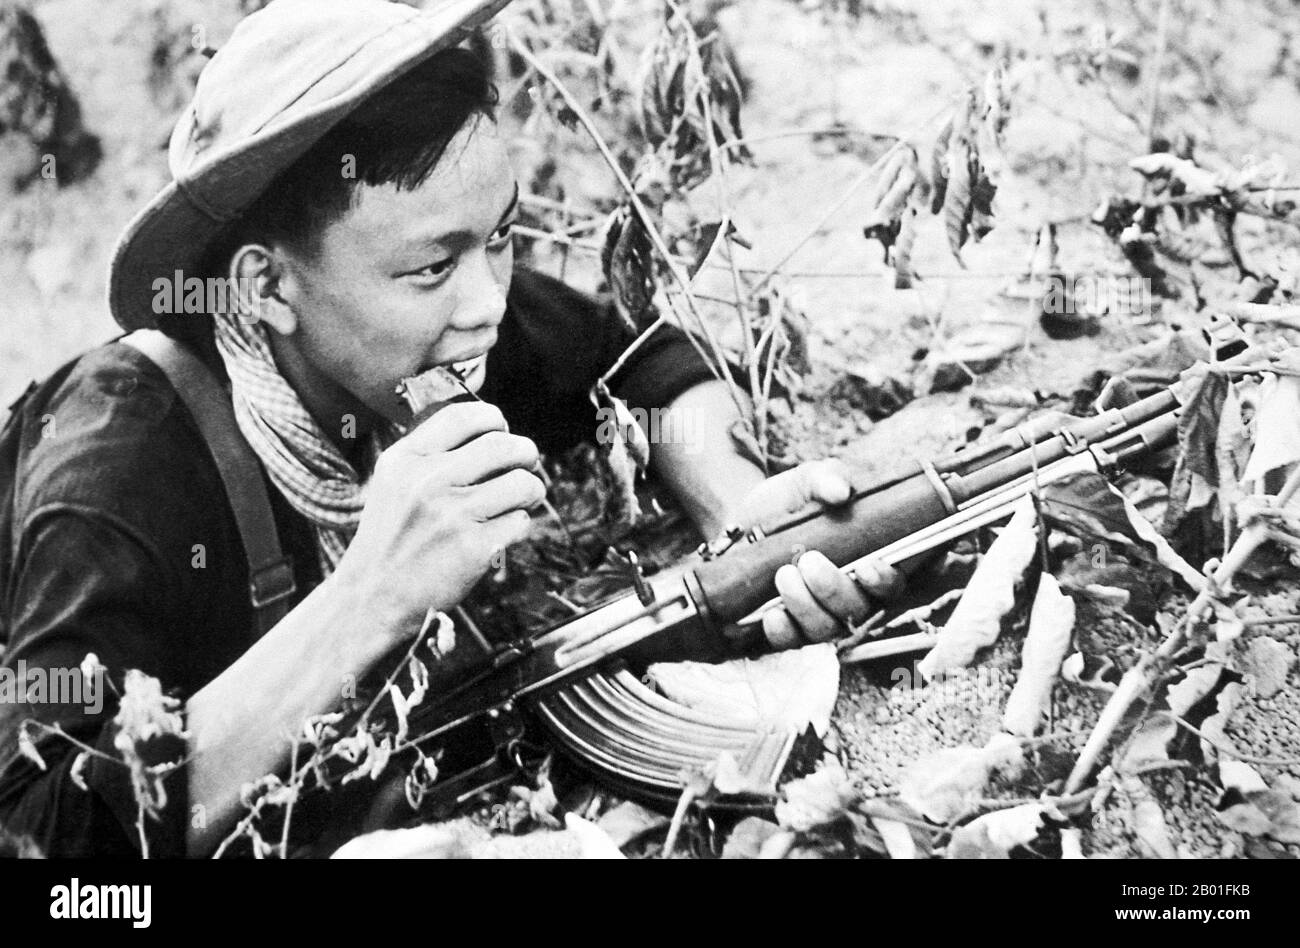 Vietnam: NLF (Viet Cong) soldier with AK47 assault rifle near Saigon, 1968.  The Second Indochina War, known in America as the Vietnam War, was a Cold War era military conflict that occurred in Vietnam, Laos, and Cambodia from 1 November 1955 to the fall of Saigon on 30 April 1975. This war followed the First Indochina War and was fought between North Vietnam, supported by its communist allies, and the government of South Vietnam, supported by the U.S. and other anti-communist nations. The U.S. government viewed involvement in the war as a way to prevent a communist takeover of South Vietnam. Stock Photo